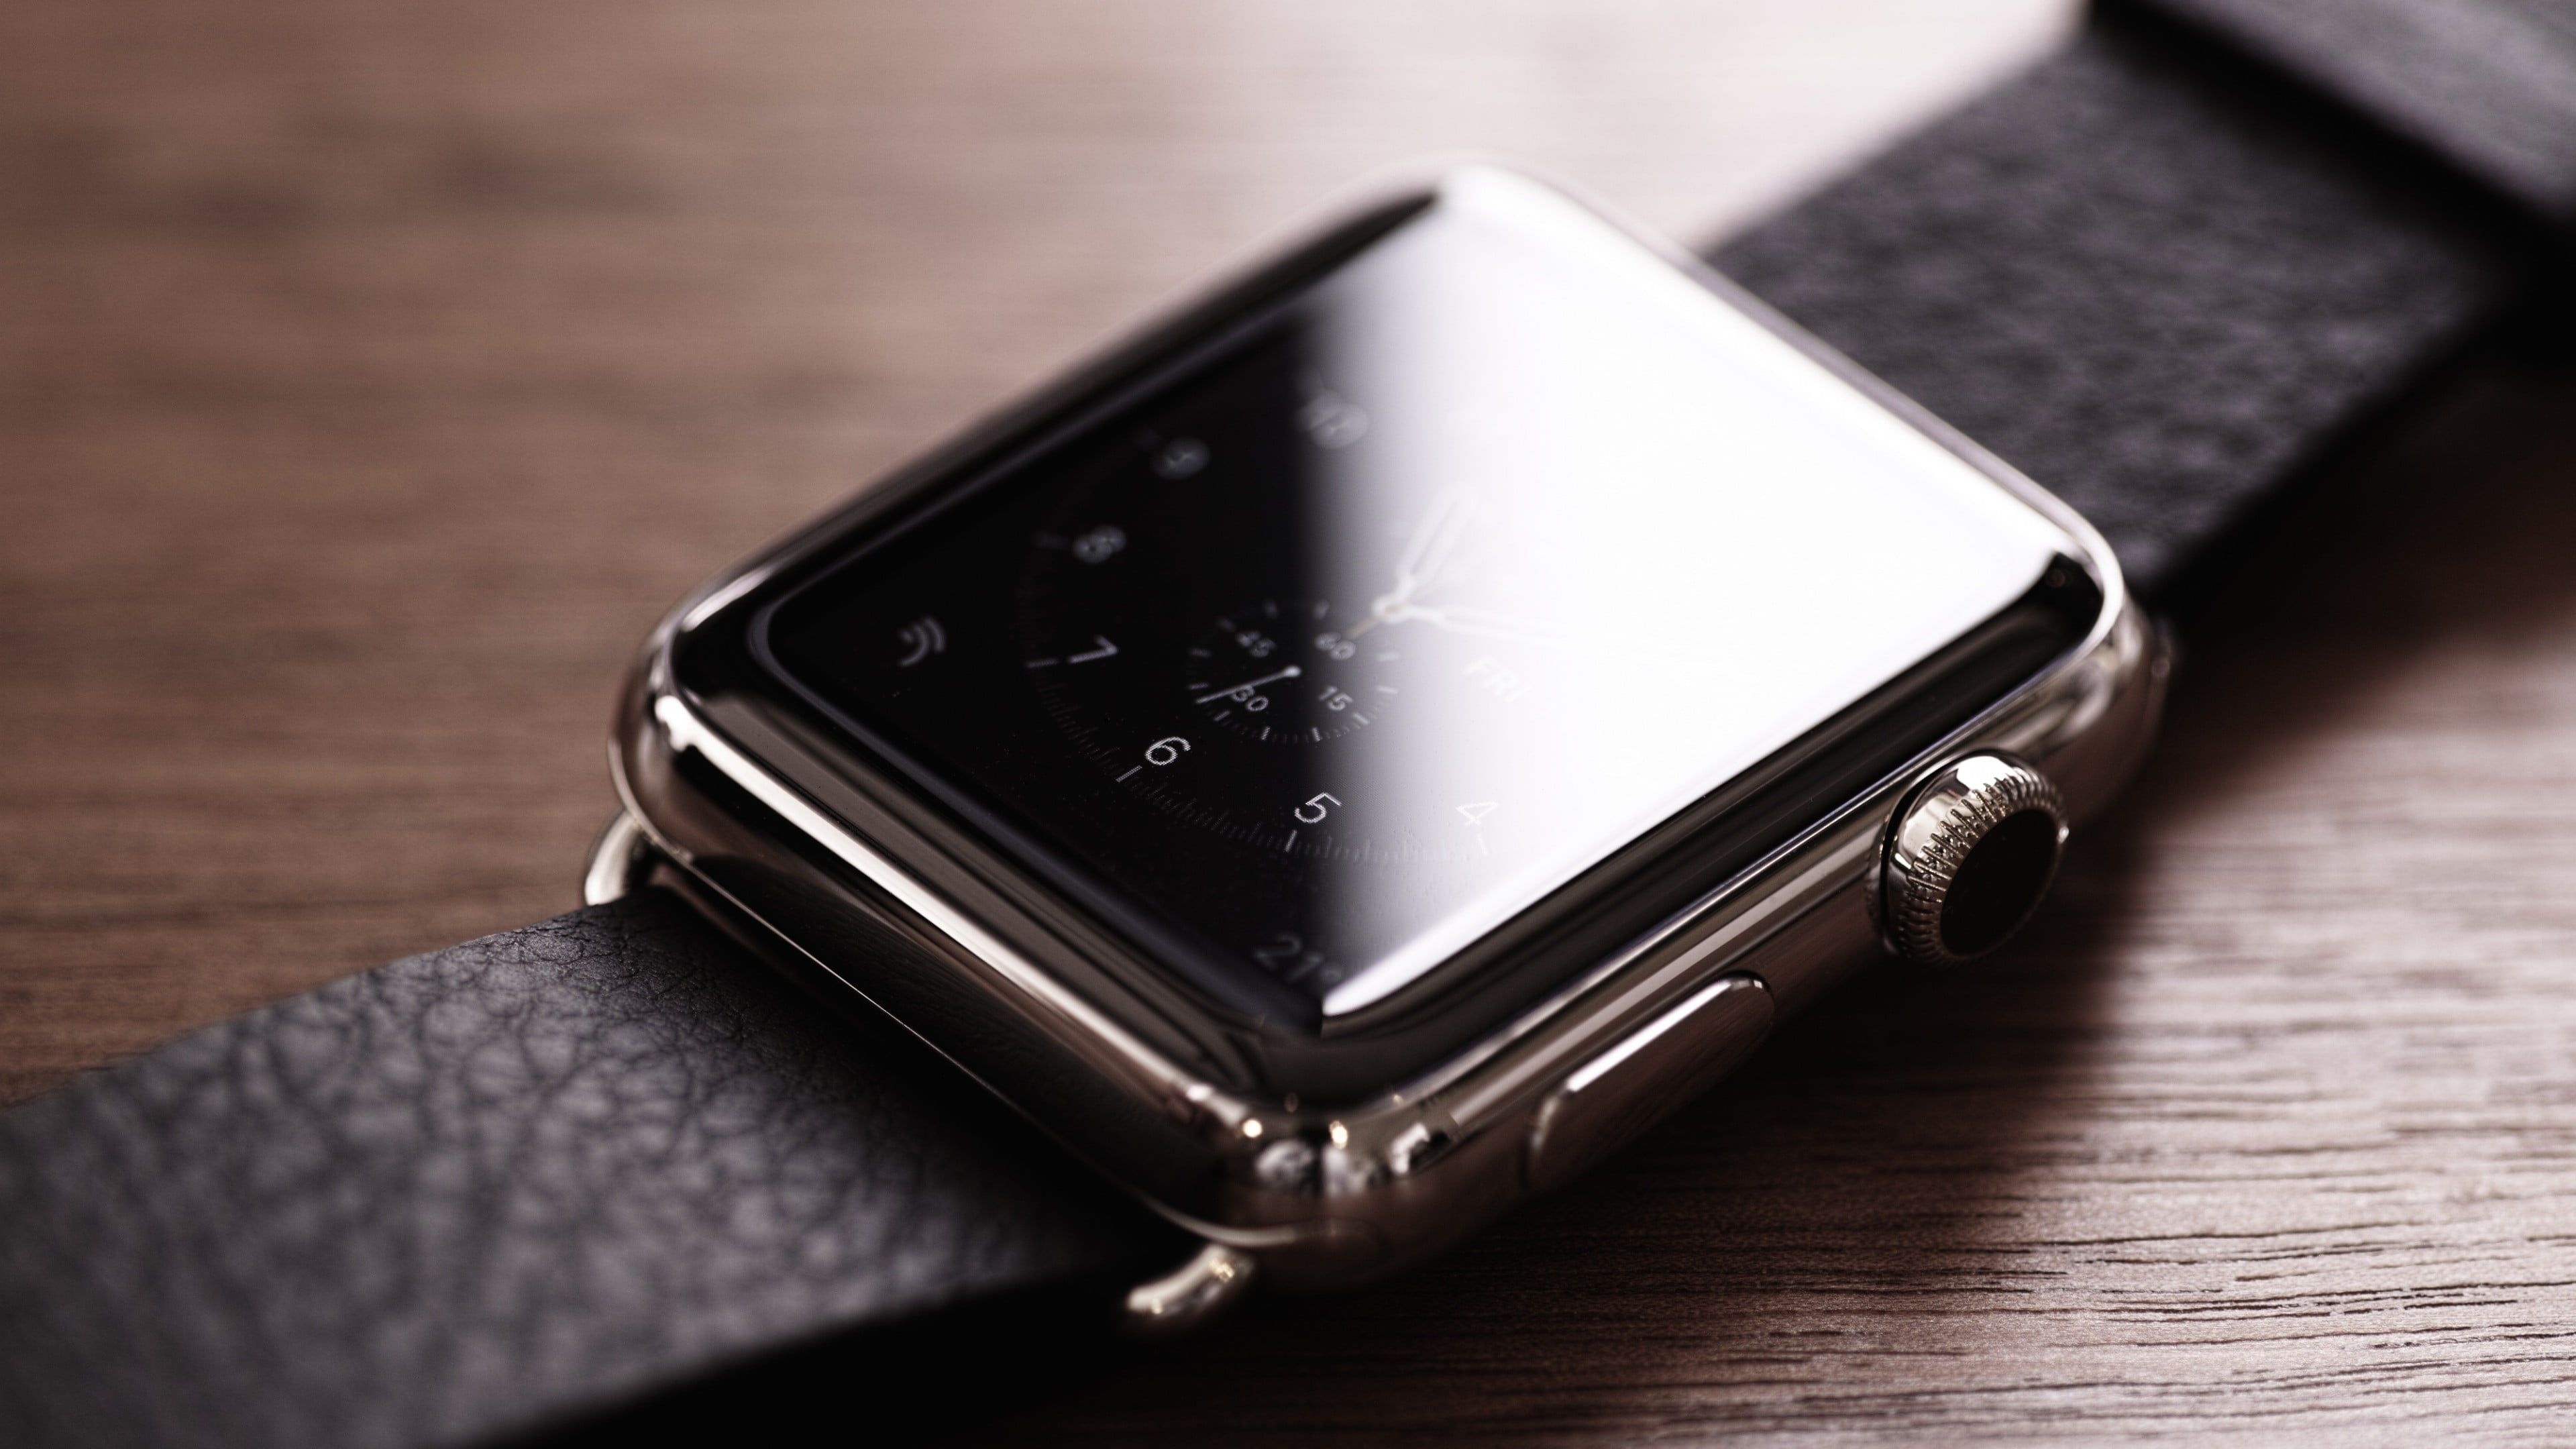 Watch iPhone wallpapers, Stylish timepieces, Mobile phone customization, Timekeeping on-the-go, 3840x2160 4K Desktop